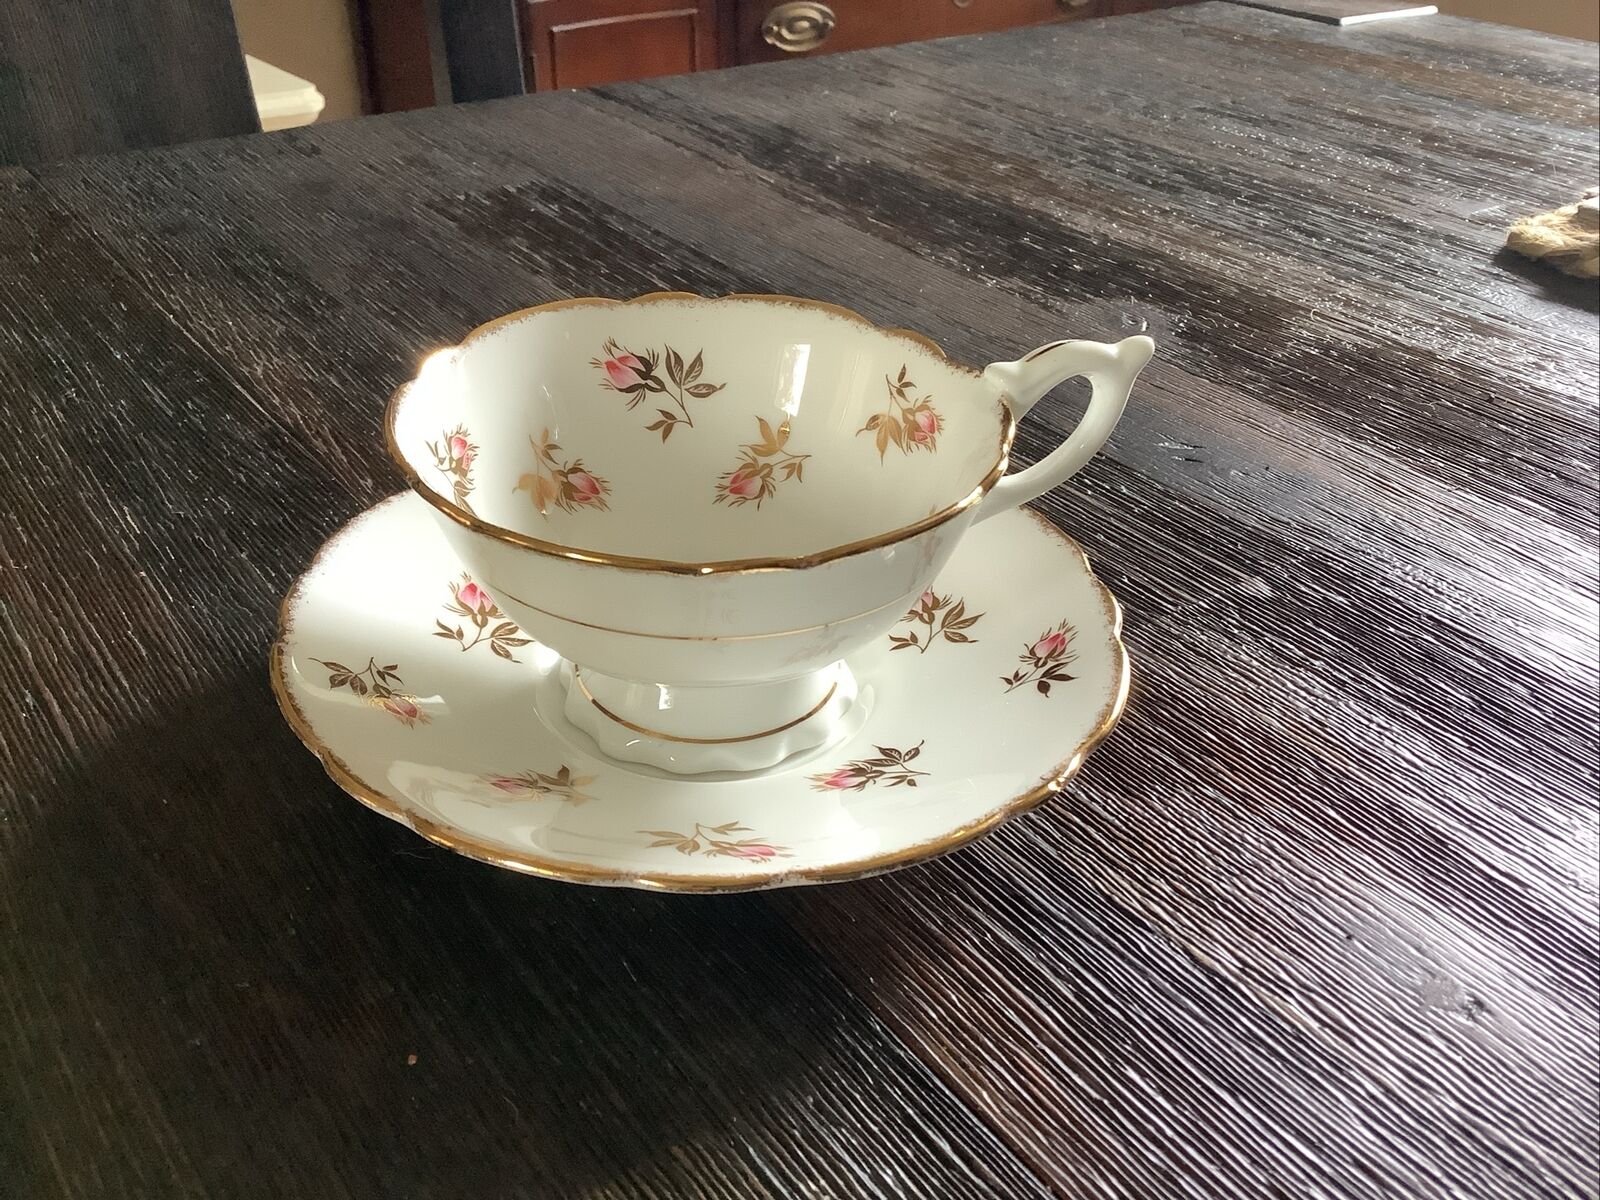 Vintage Royal Stafford Pink Rose Bud Tea Cup Set With Gold Accents